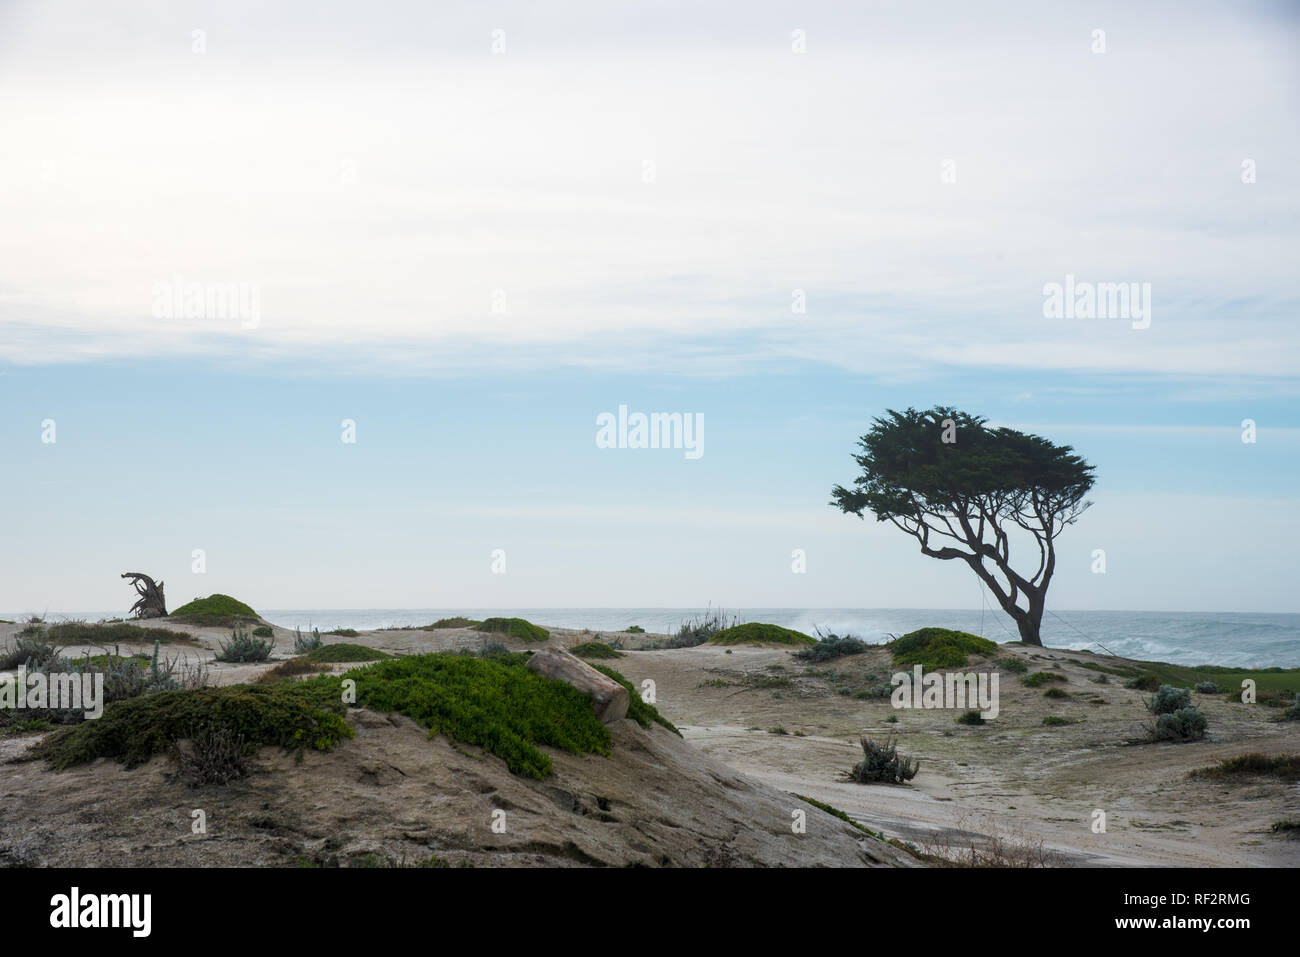 Rocky shore line, waves and beach scene on the Monterrey Peninsula.  The variation and variety of beautiful seascapes are endless. Stock Photo